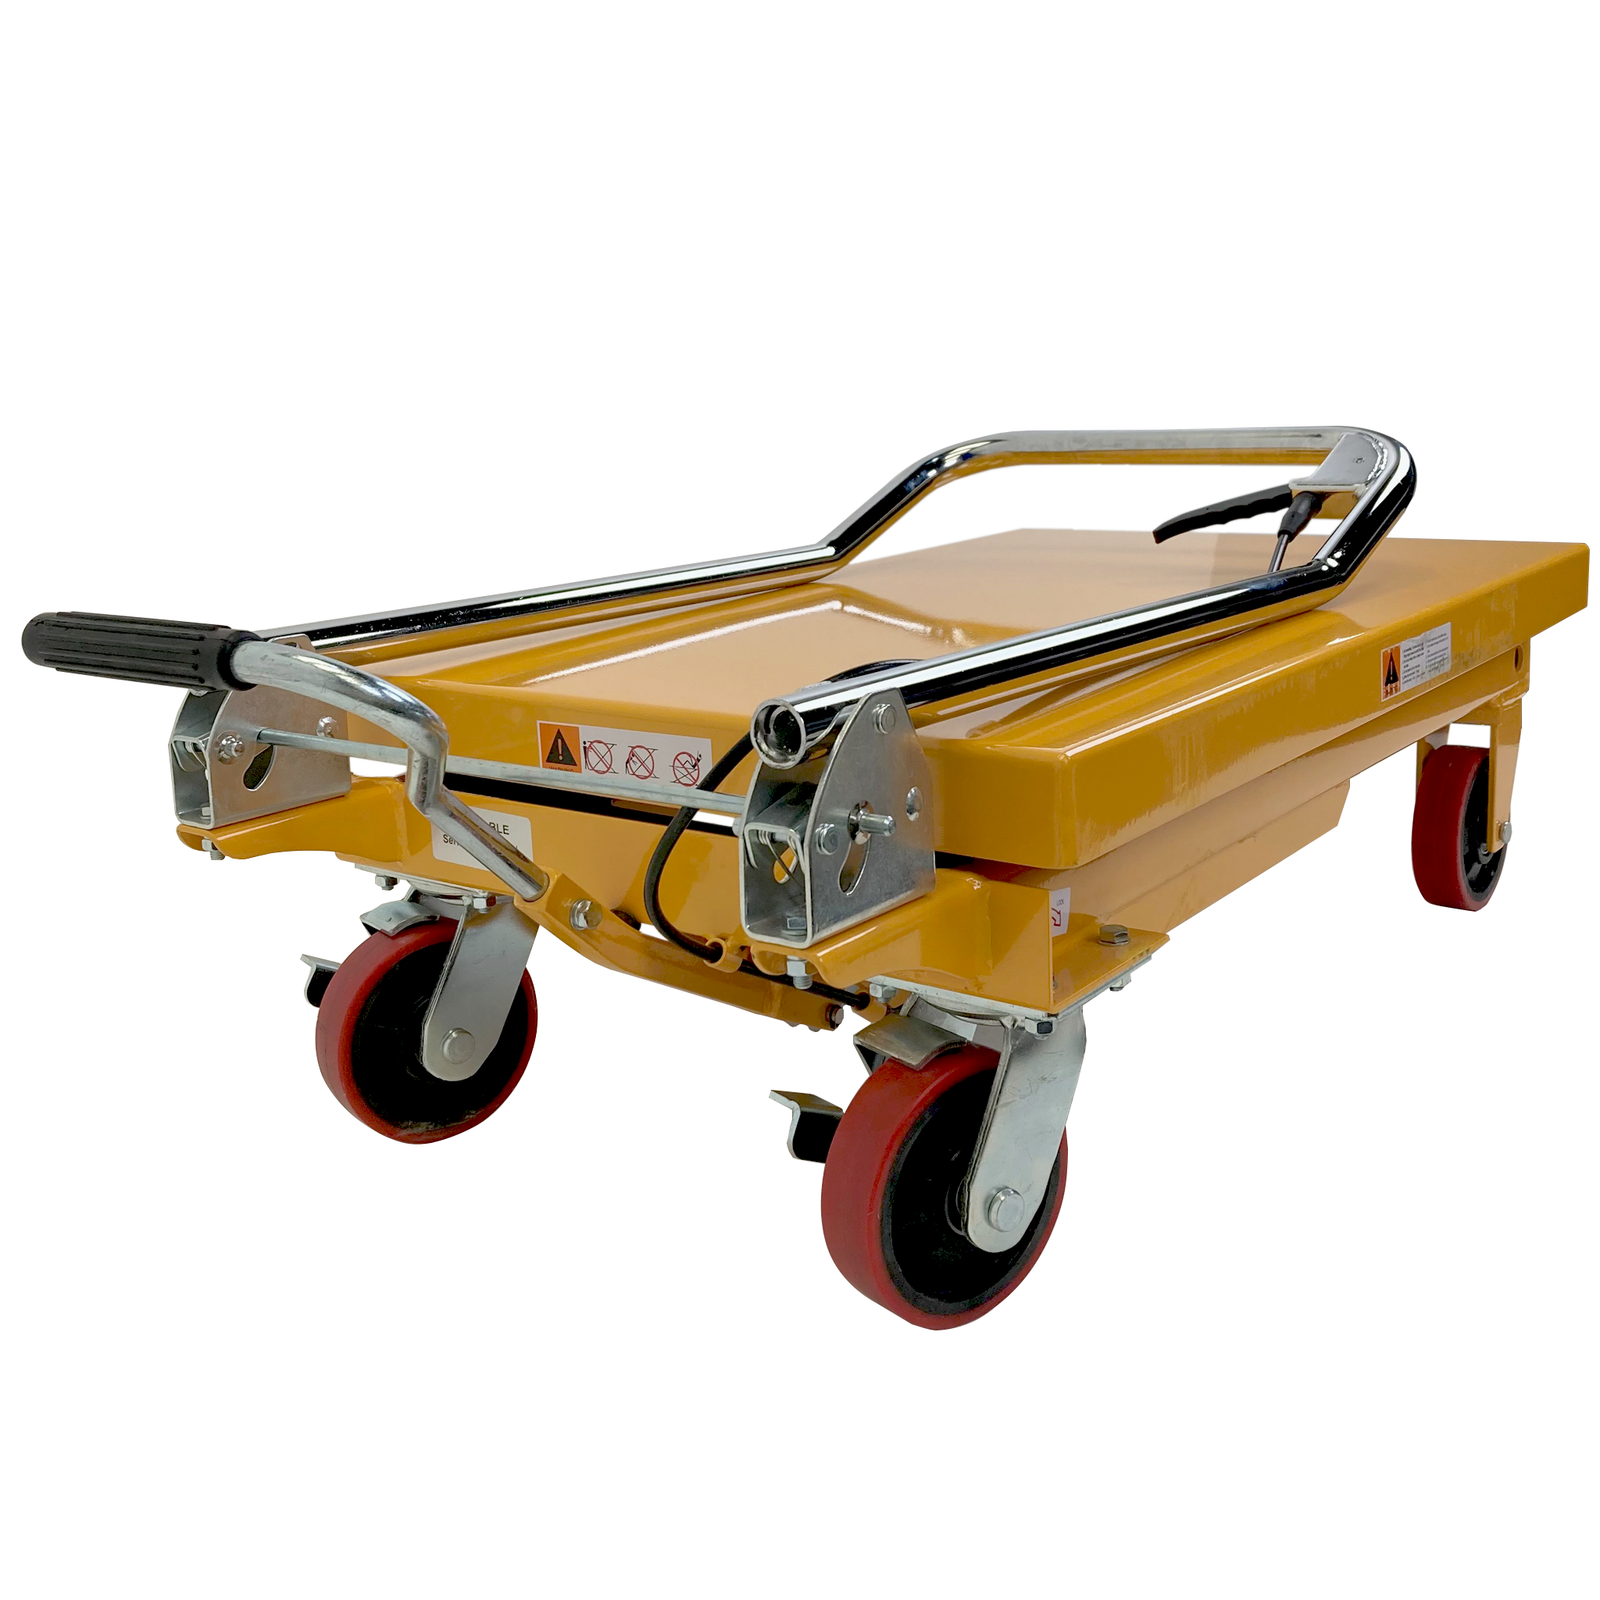 Yellow table lift for 300 kilograms with the handle of the JORES TECHNOLOGIES® scissor table lift collapsed to make it less bulky when storage or for transportation. Also shows all 4 red heavy duty rubber wheels. The 2 whels on the back have brakes, the 2 wheels on the front do not have brakes.